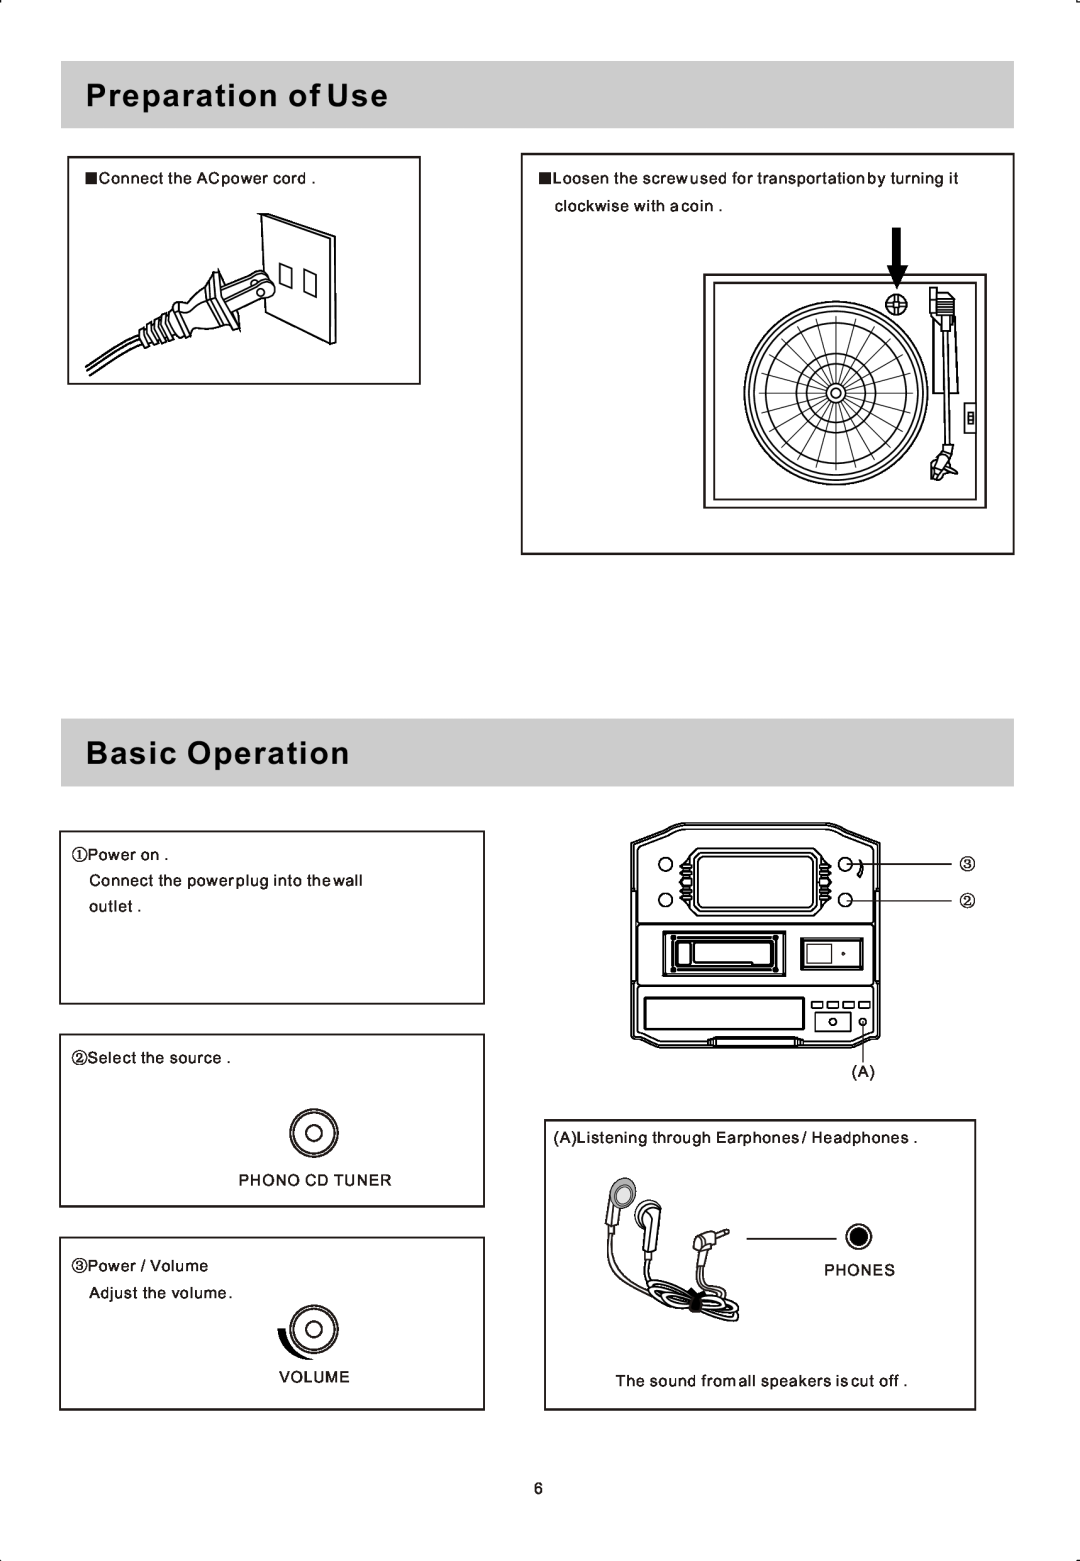 Sylvania SRCD822 manual Preparation of Use, Basic Operation, Connect the AC power cord, Power on, Adjust the volume VOLUME 